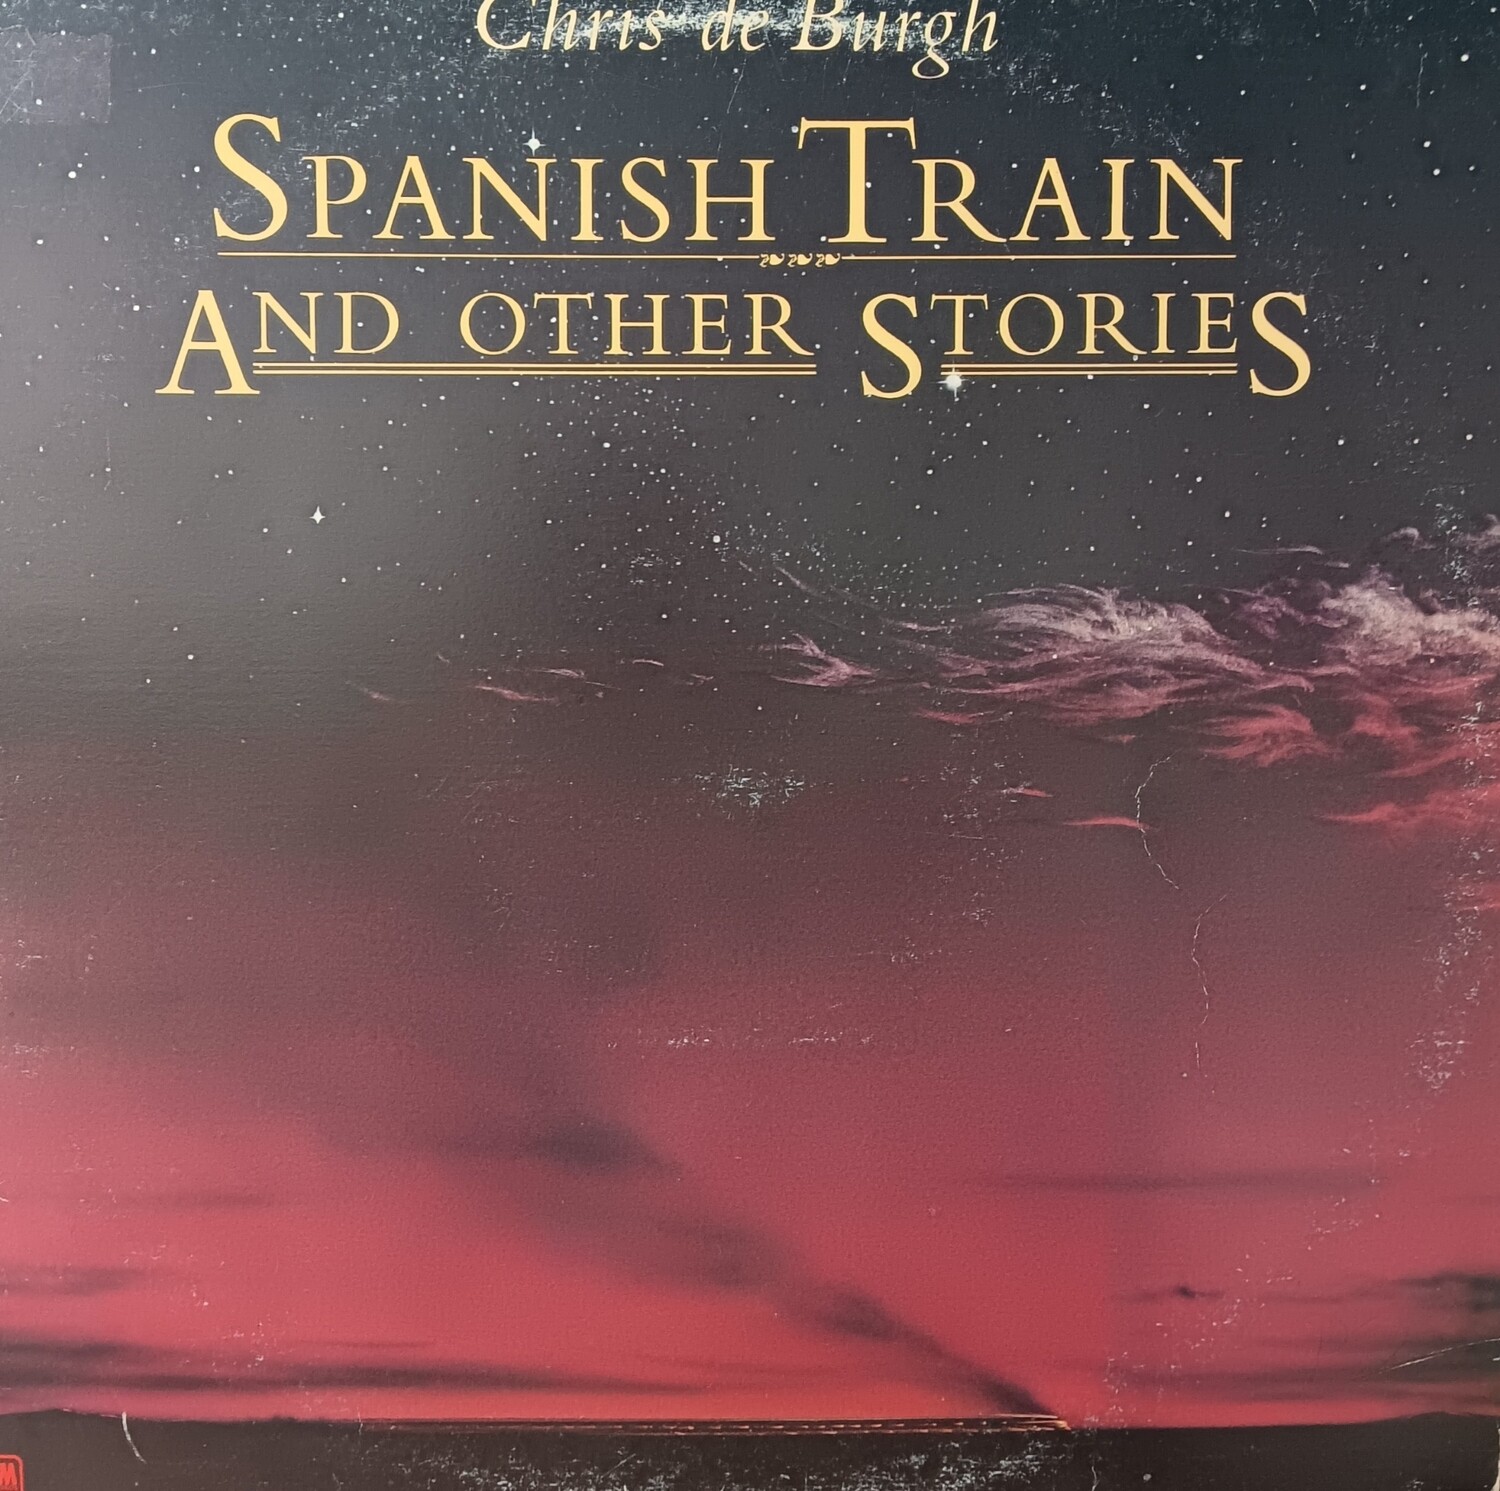 CHRIS DE BURGH - Spanish Train and Other Stories